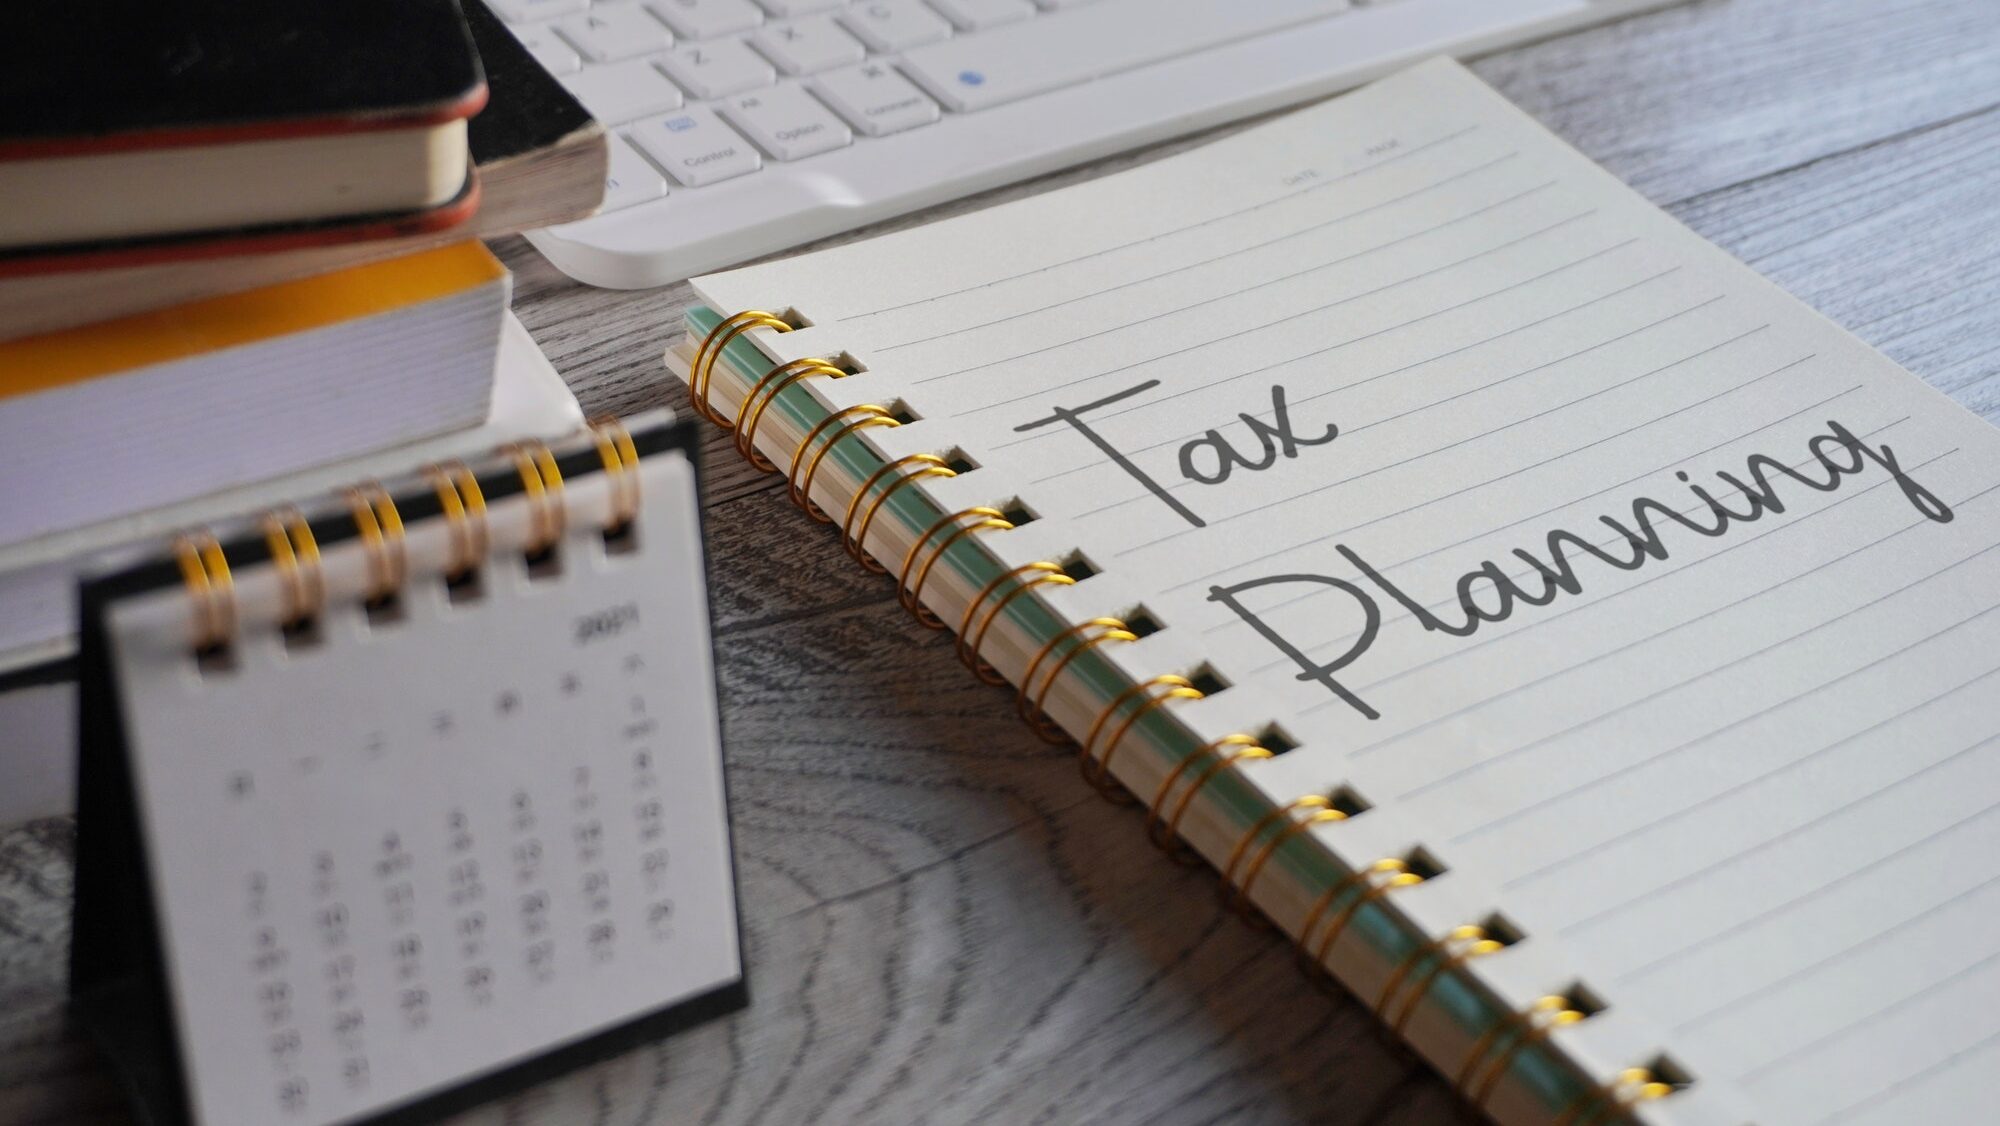 Closeup image of notebook with text TAX PLANNING and calendar on office desk.